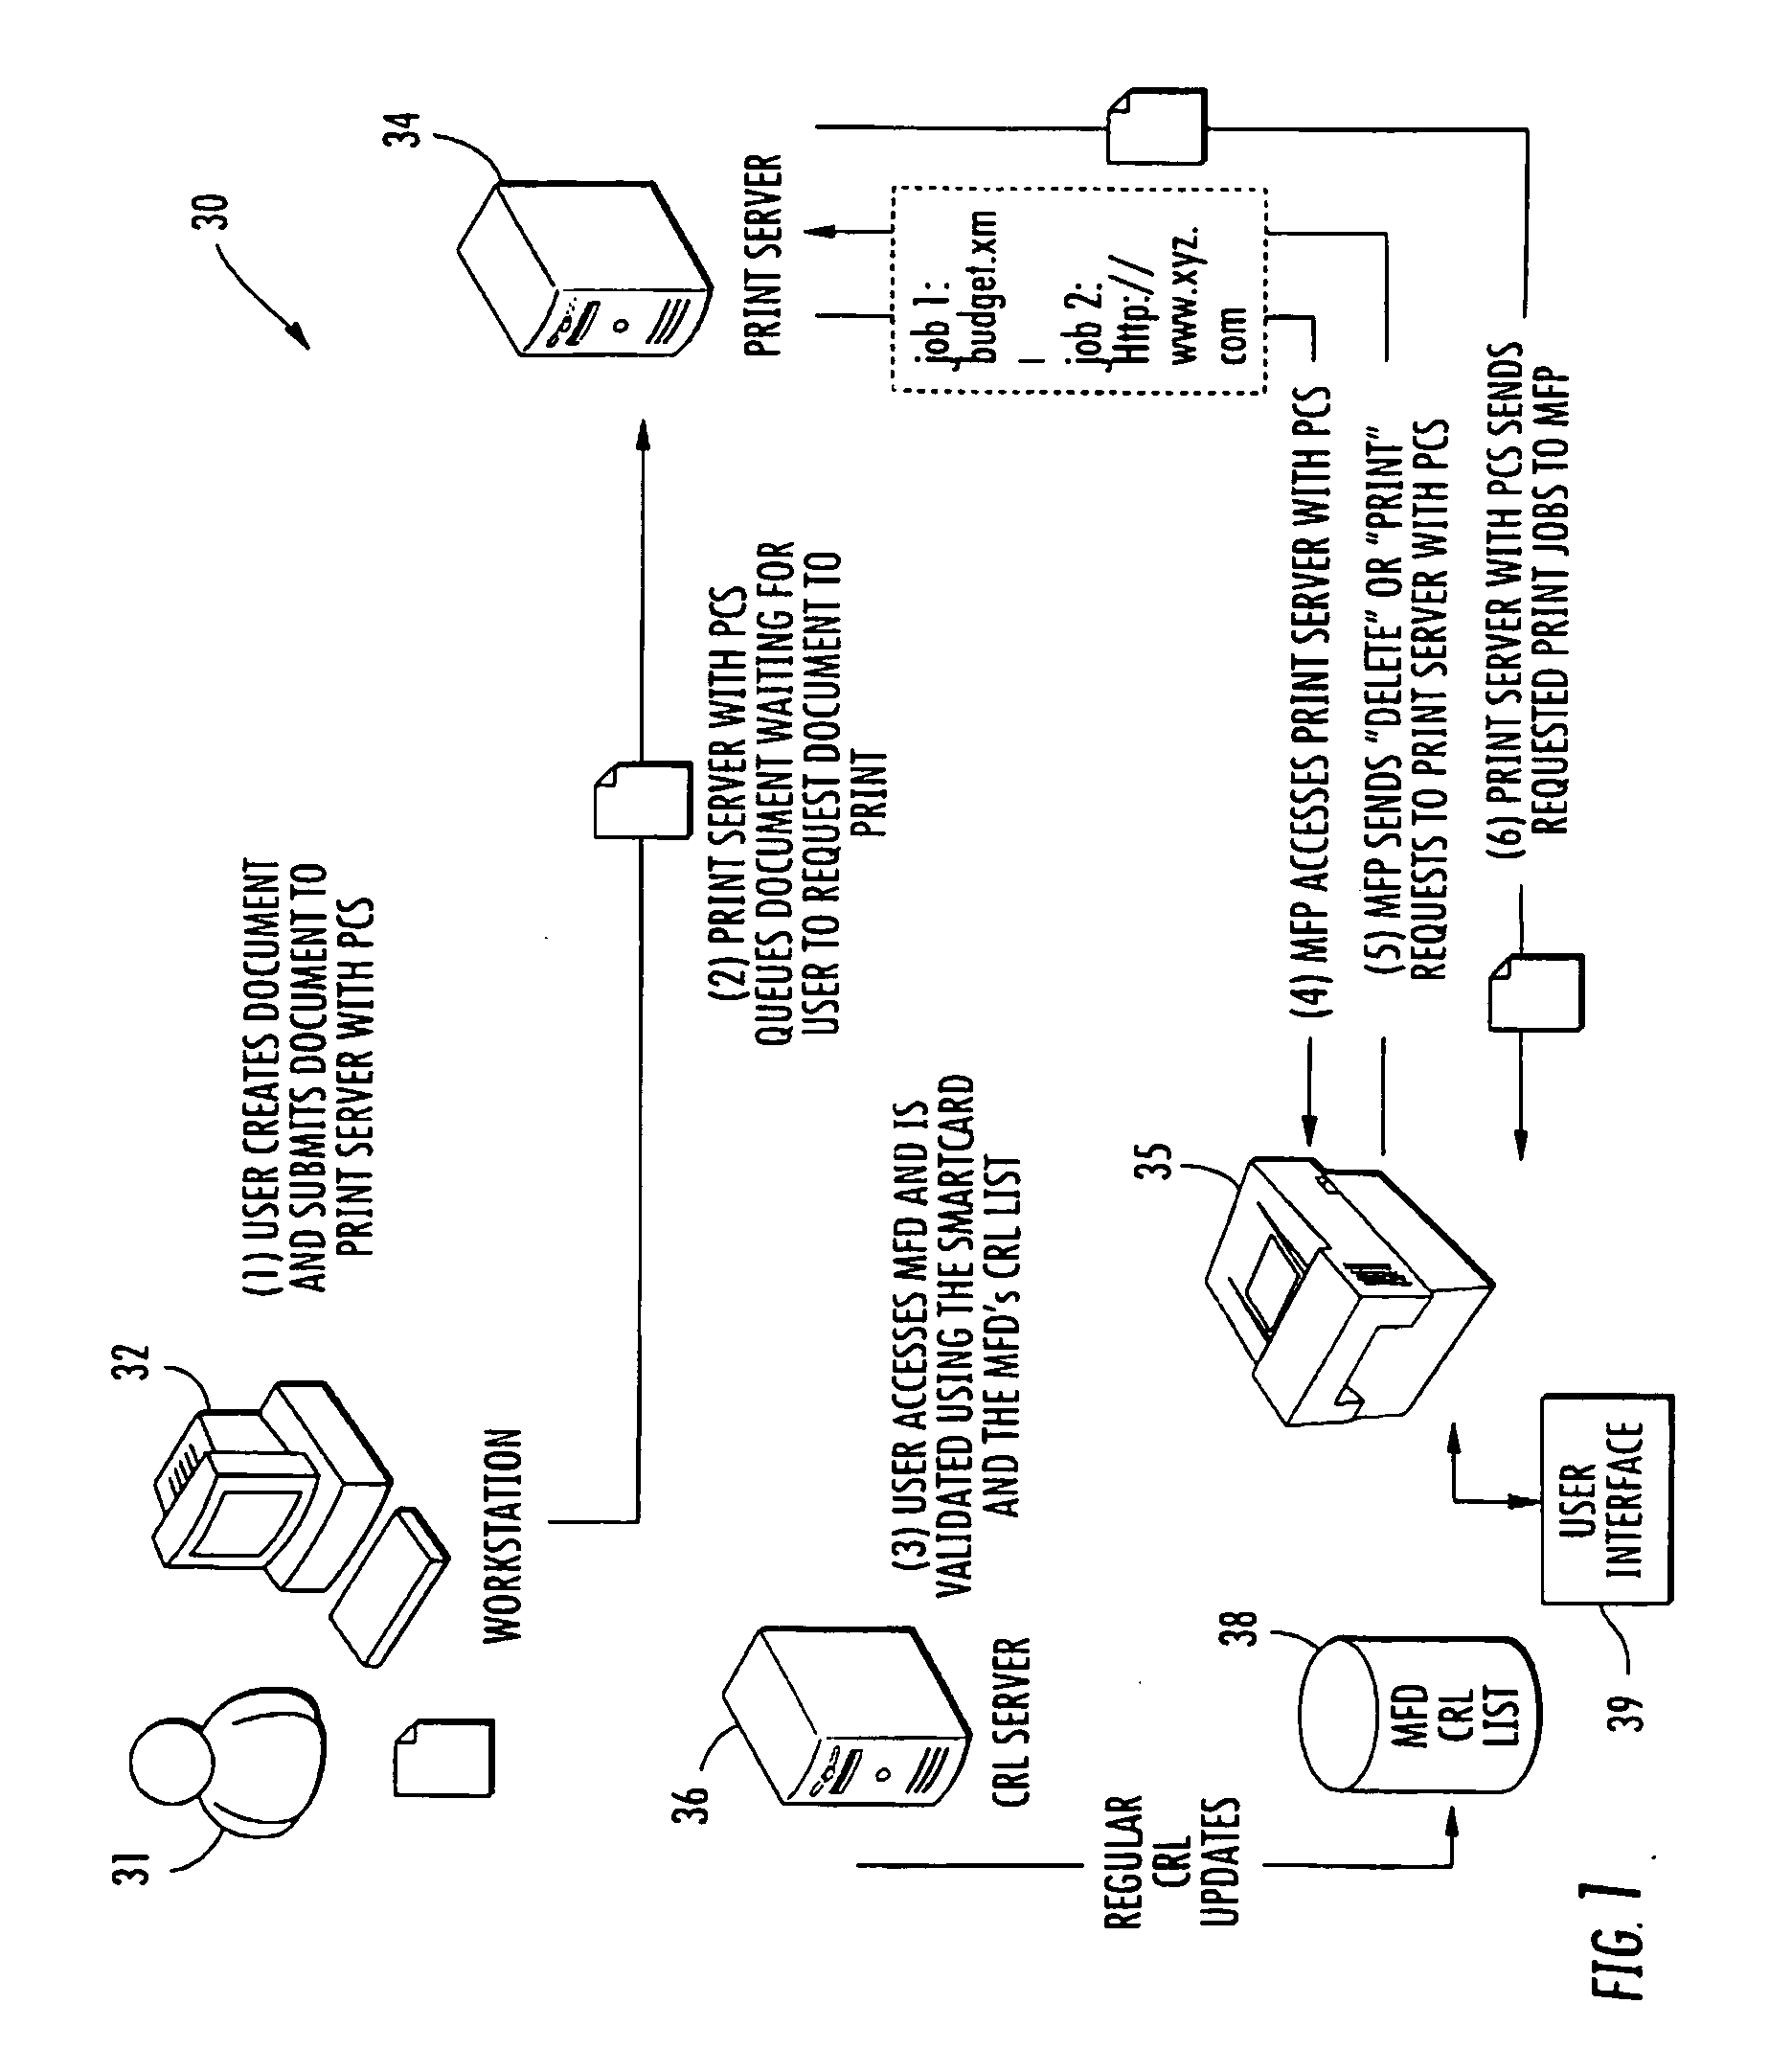 Print management system and related methods